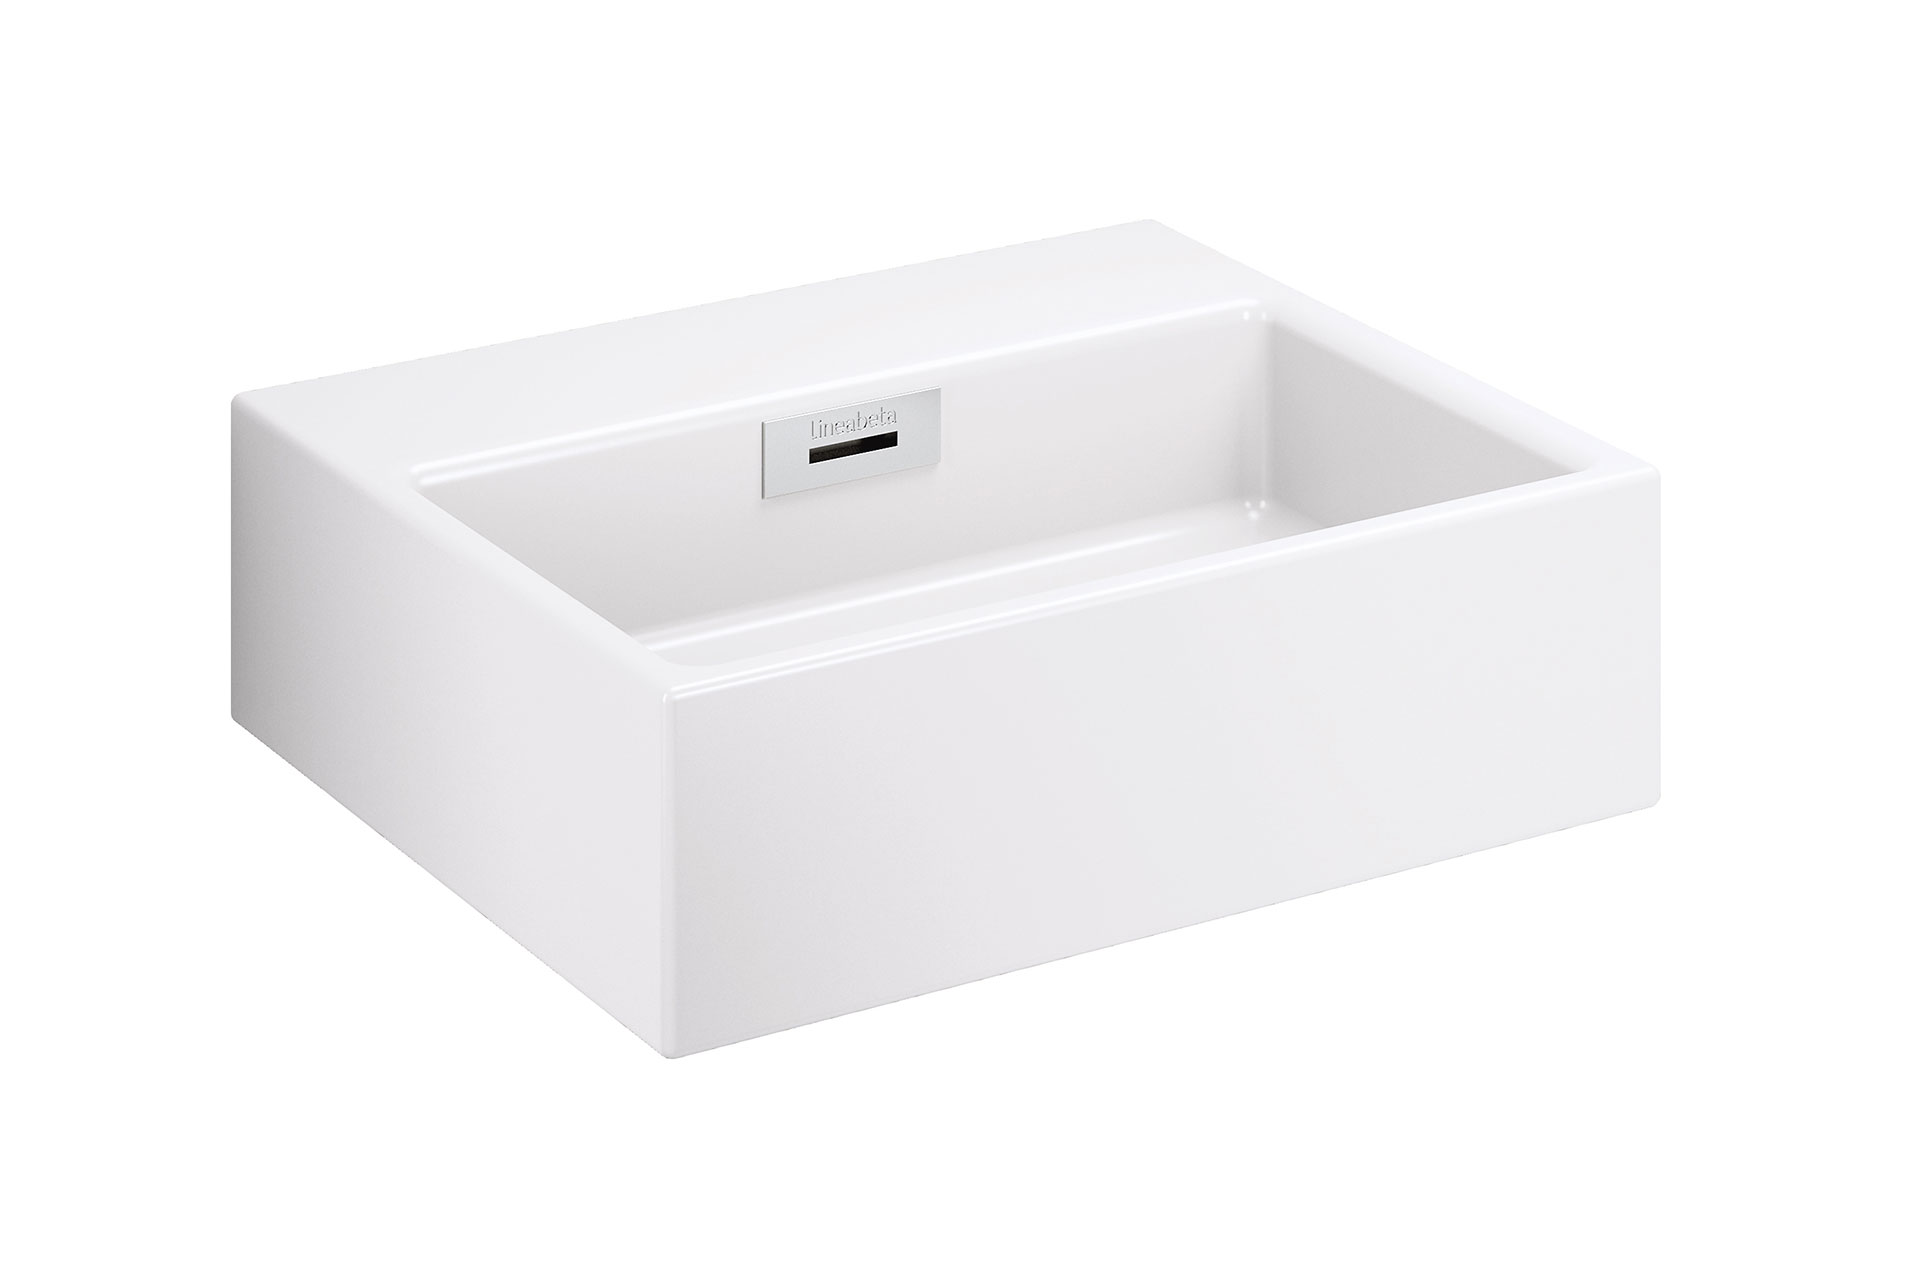 Countertop washbasin without tap hole, without waste water drain